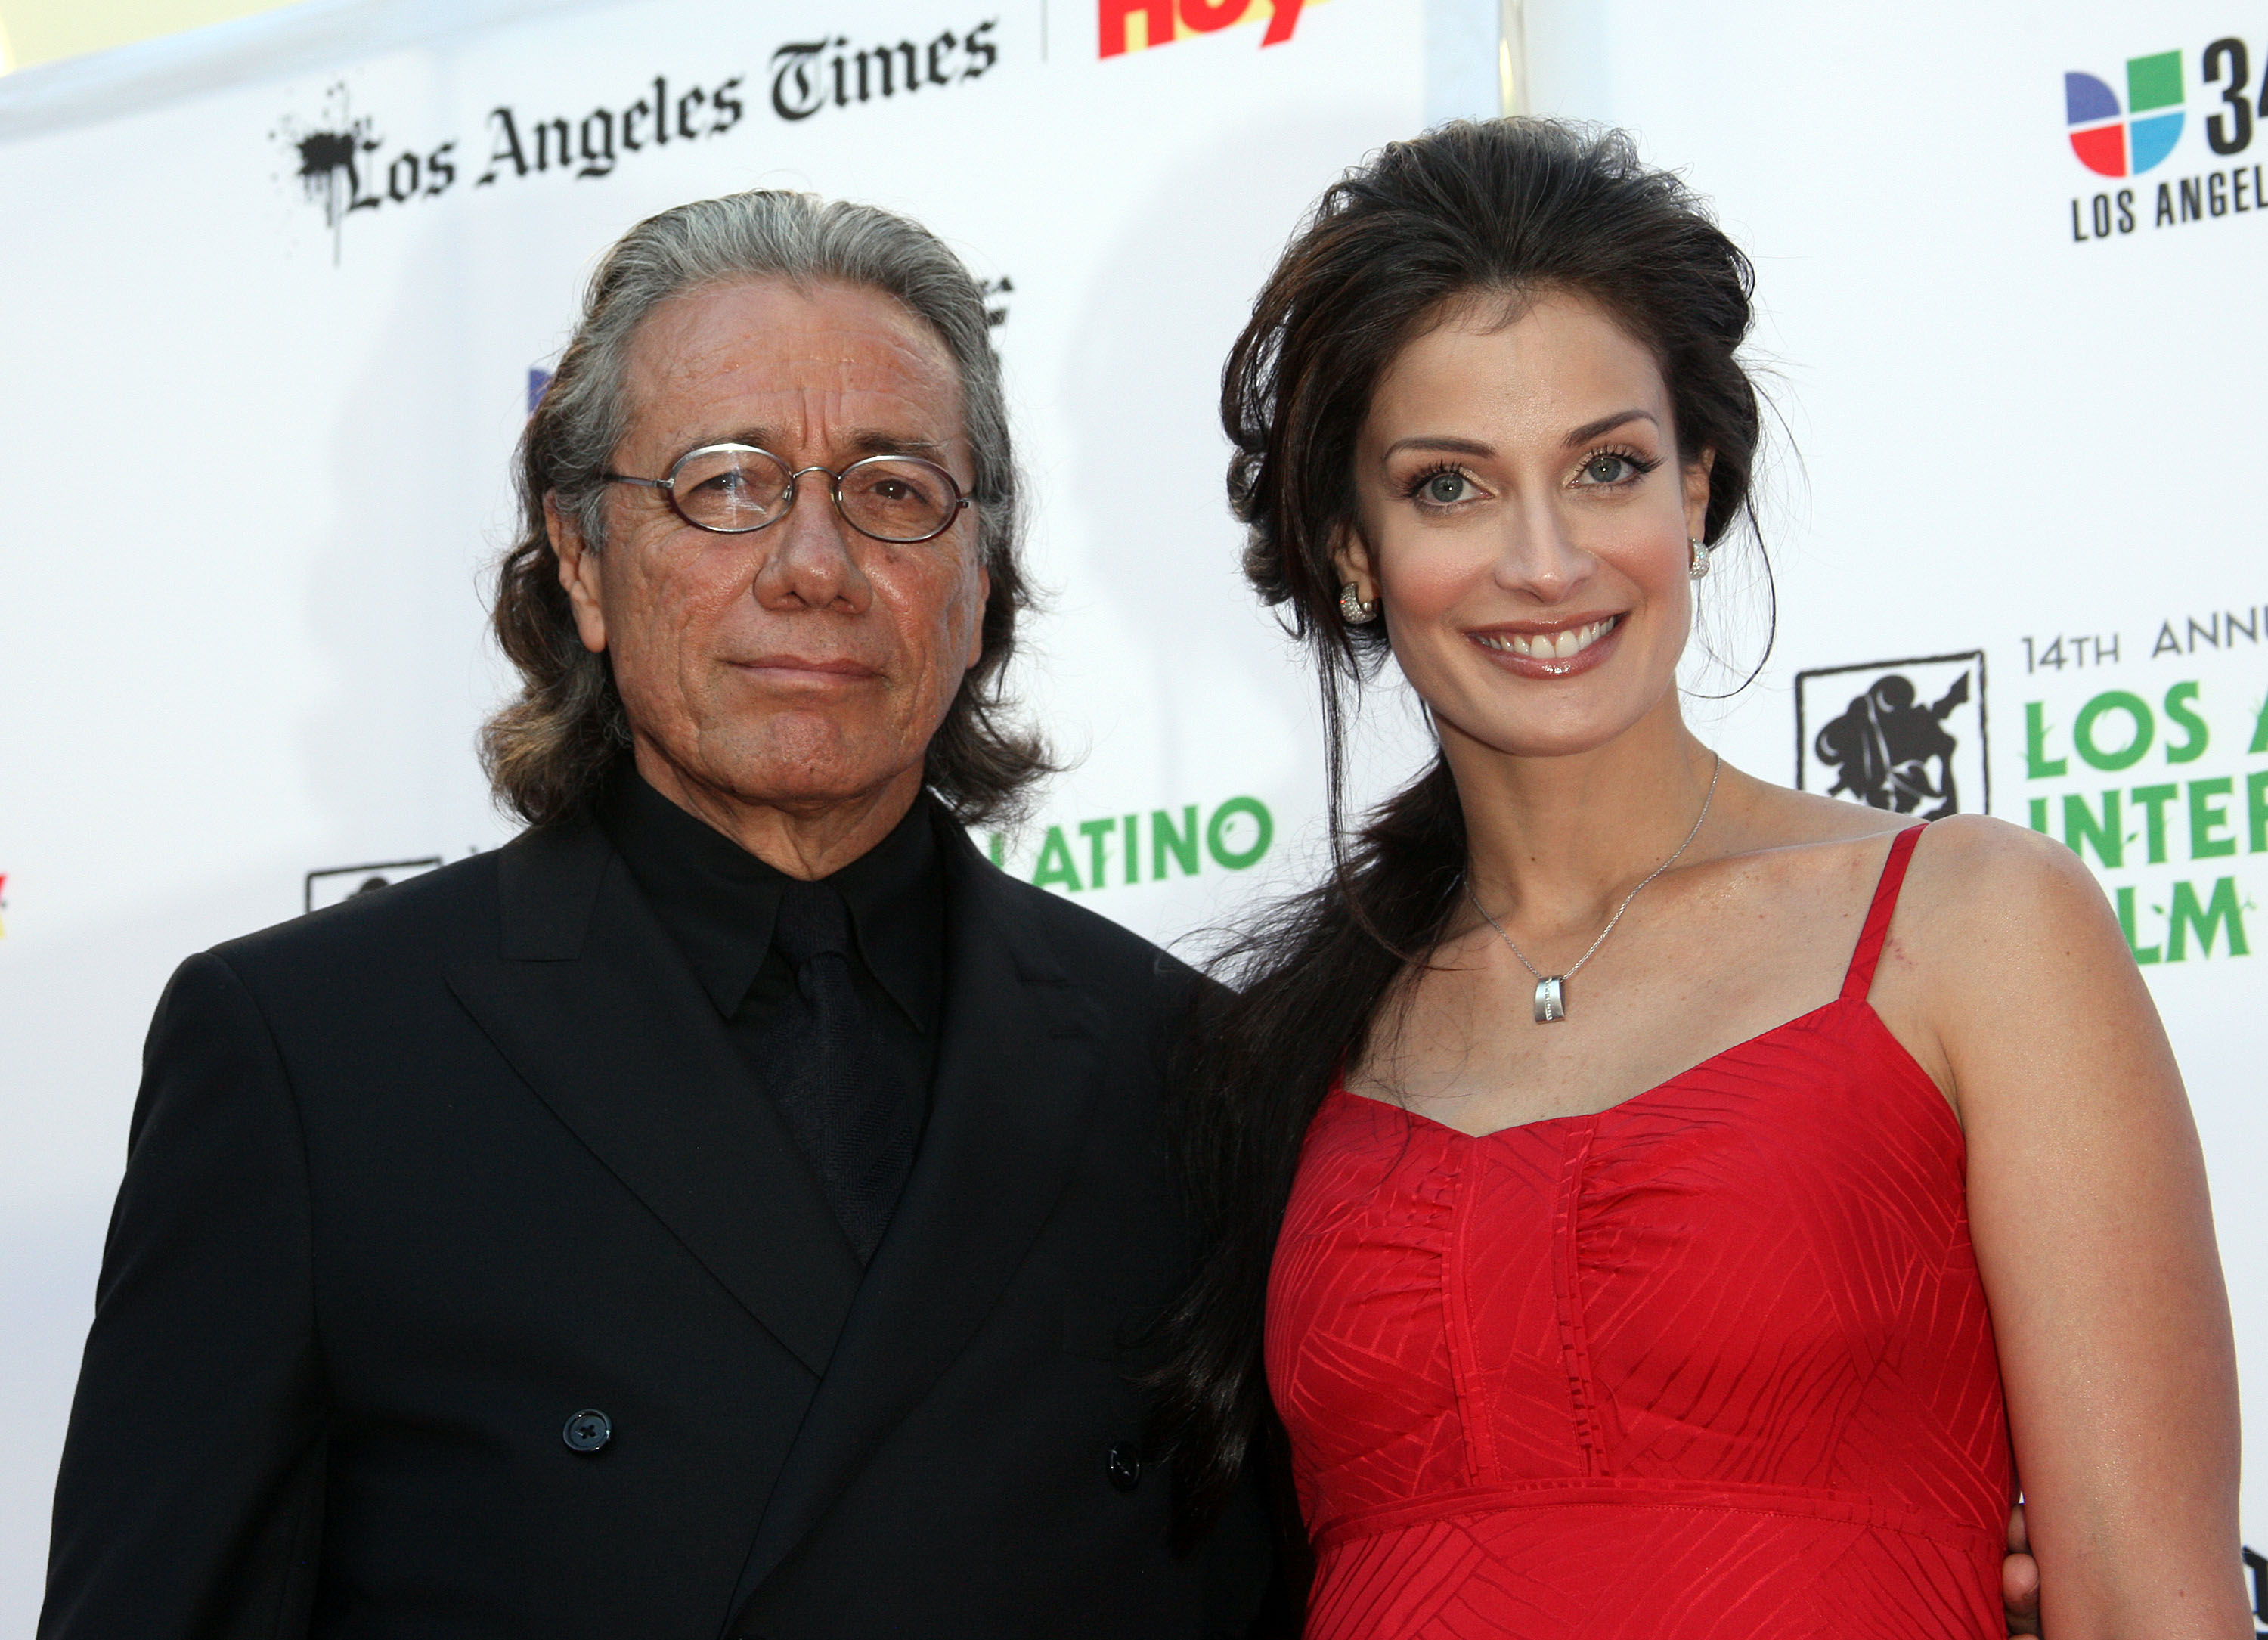 Edward James Olmos (L) and actress Dayanara Torres attend Los Angeles Latino International Film Festival opening night gala at Grauman's Chinese Theater on August 19, 2010.
